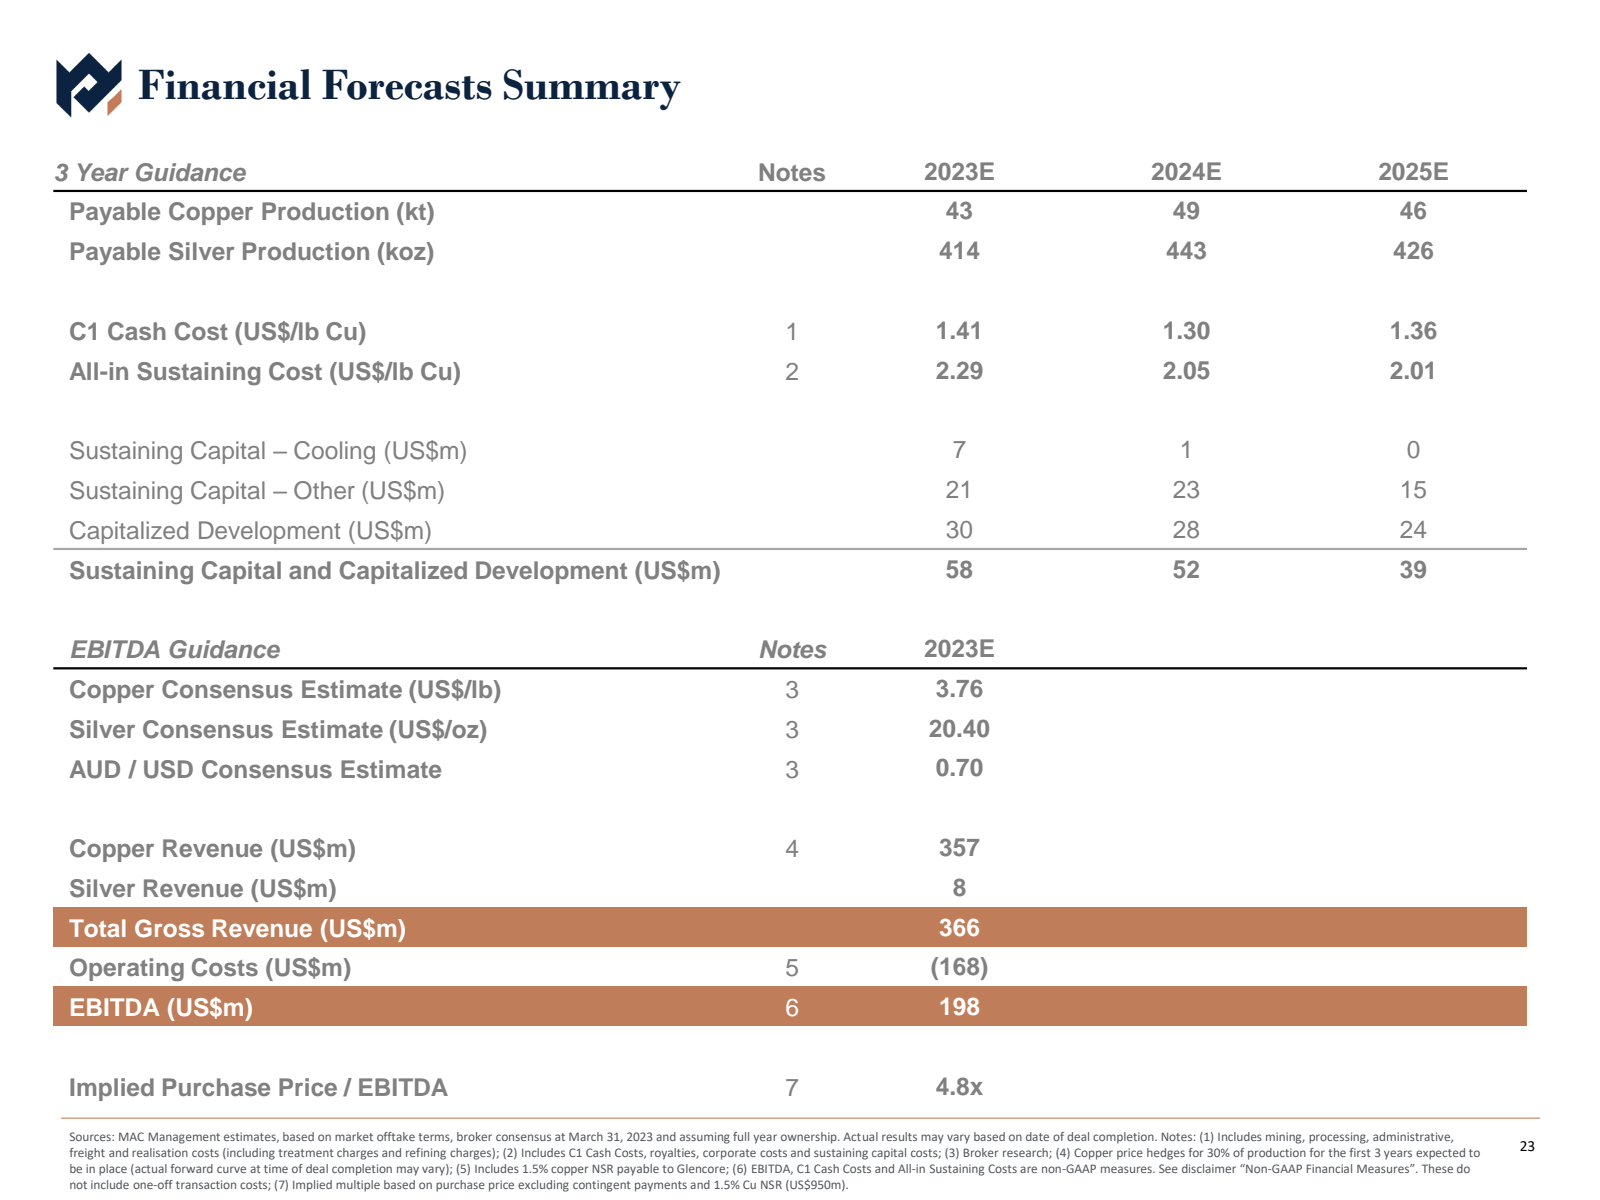 Financial Forecasts 